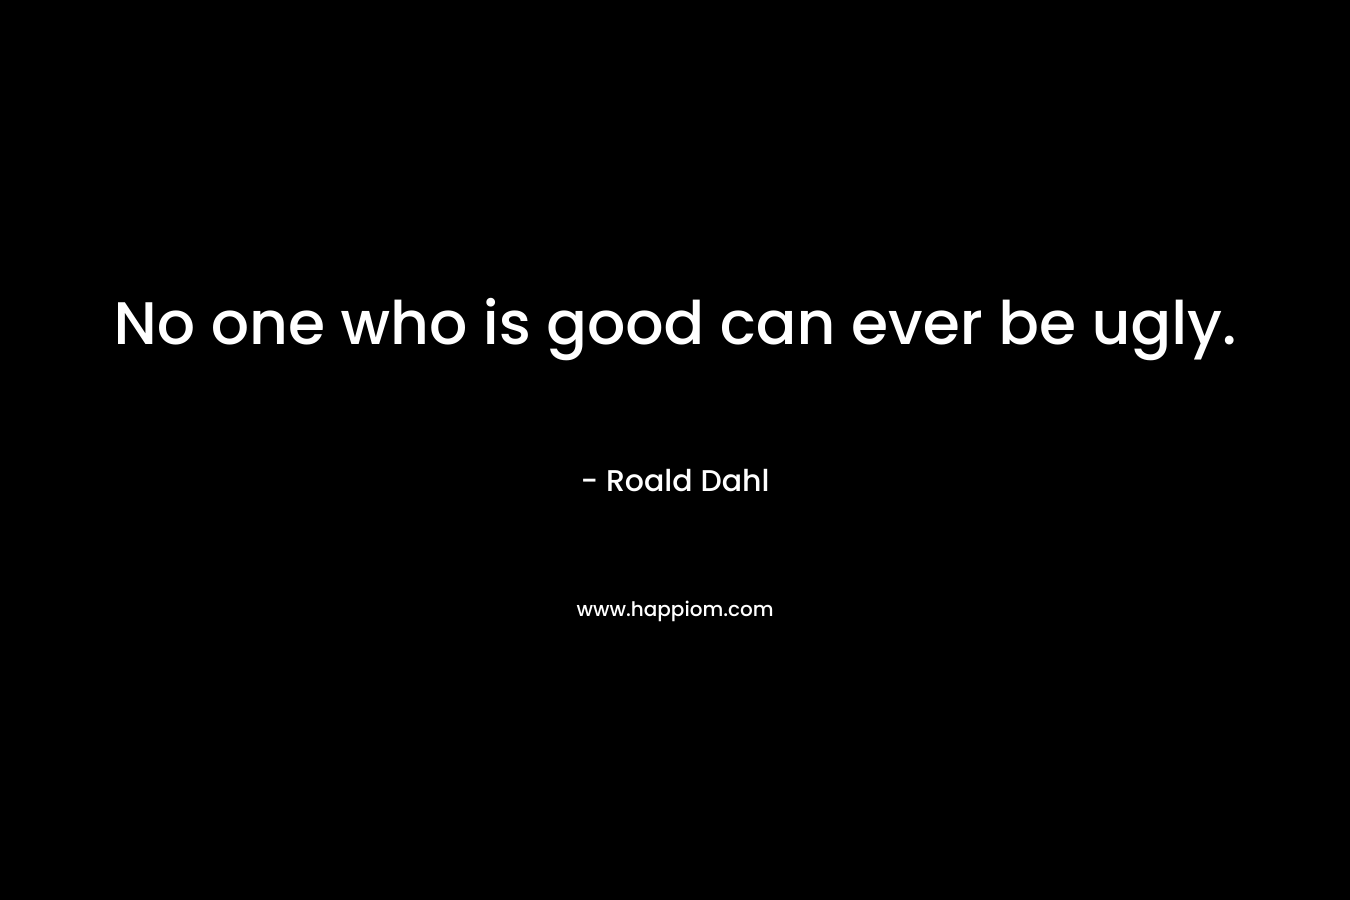 No one who is good can ever be ugly. – Roald Dahl